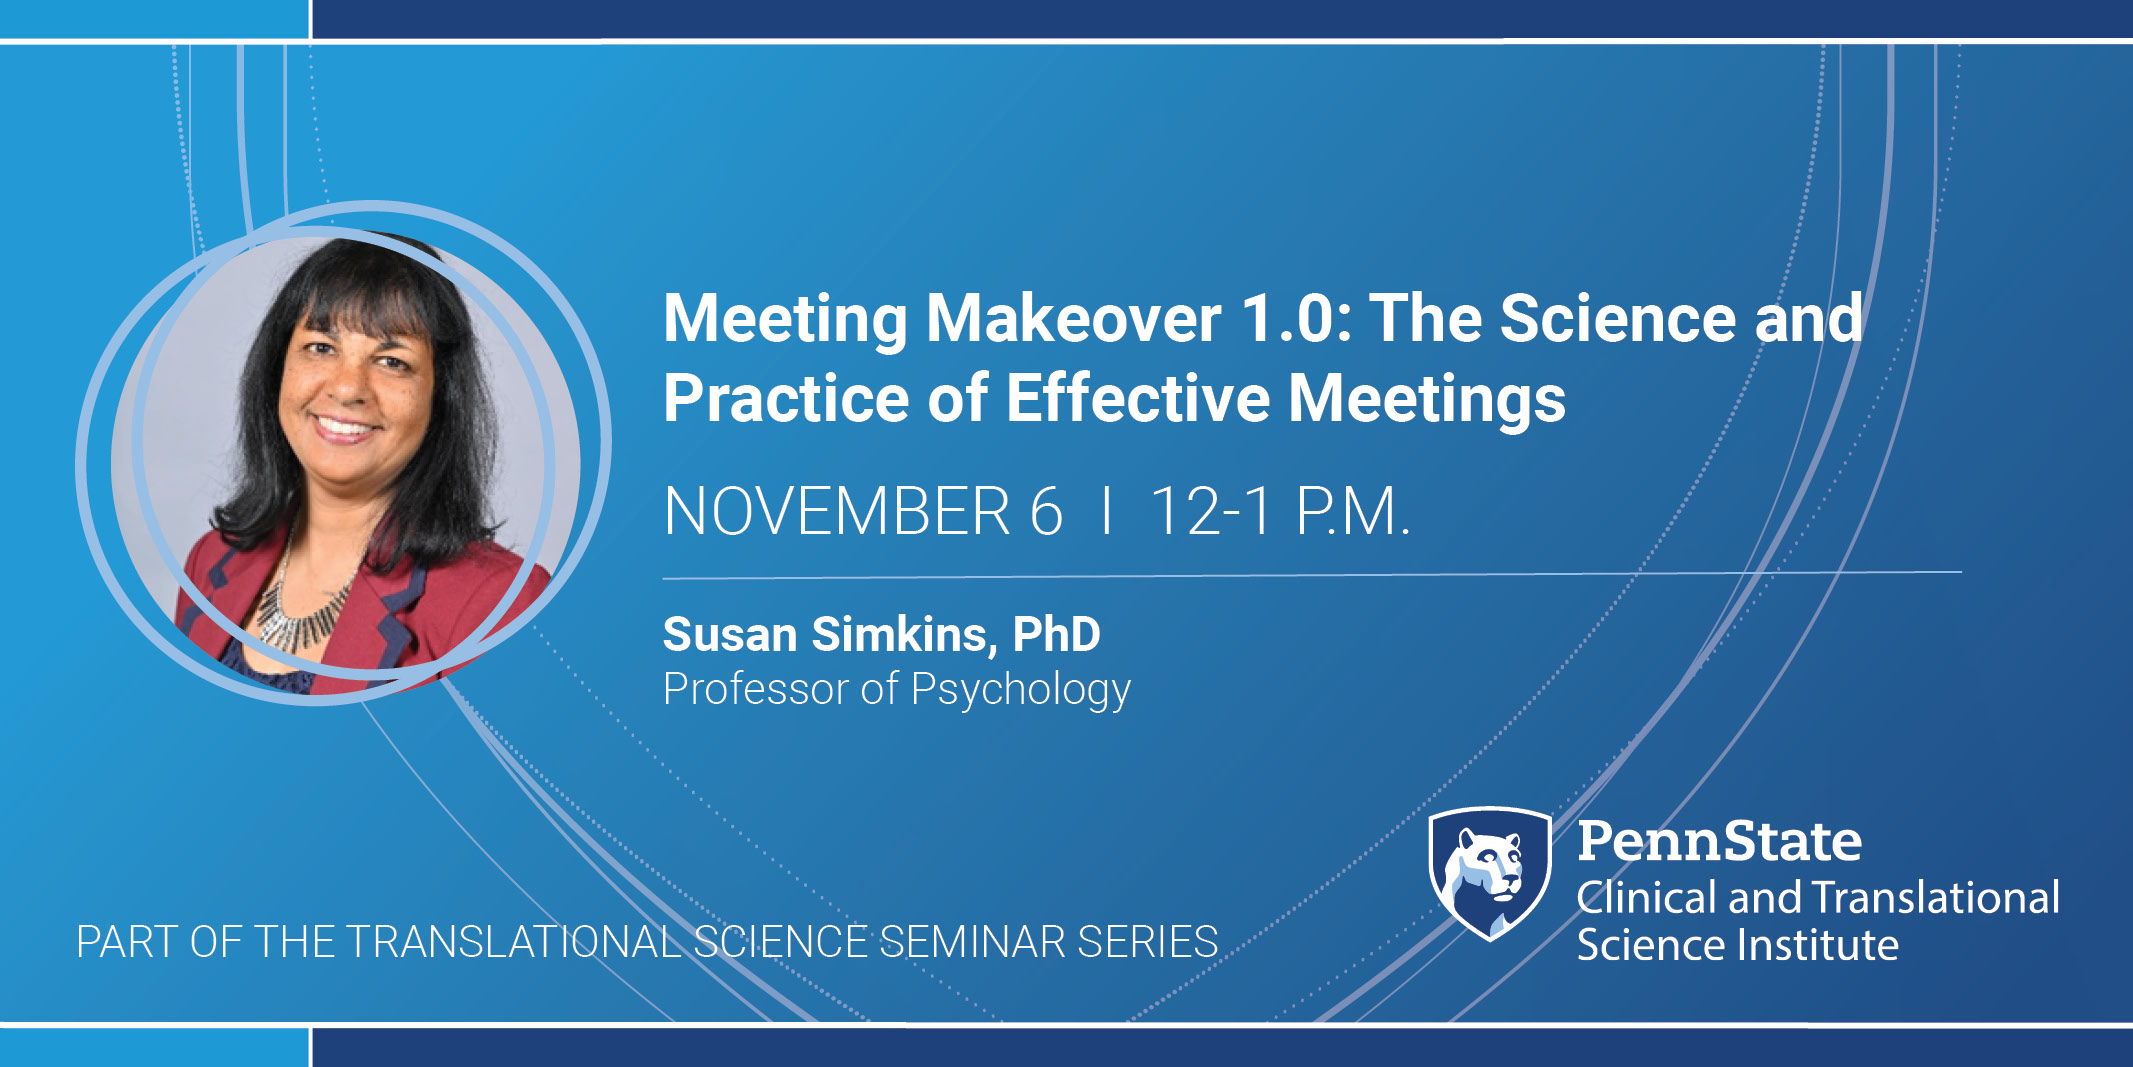 Meeting Makeover 1.0: The Science and Practice of Effective Meetings